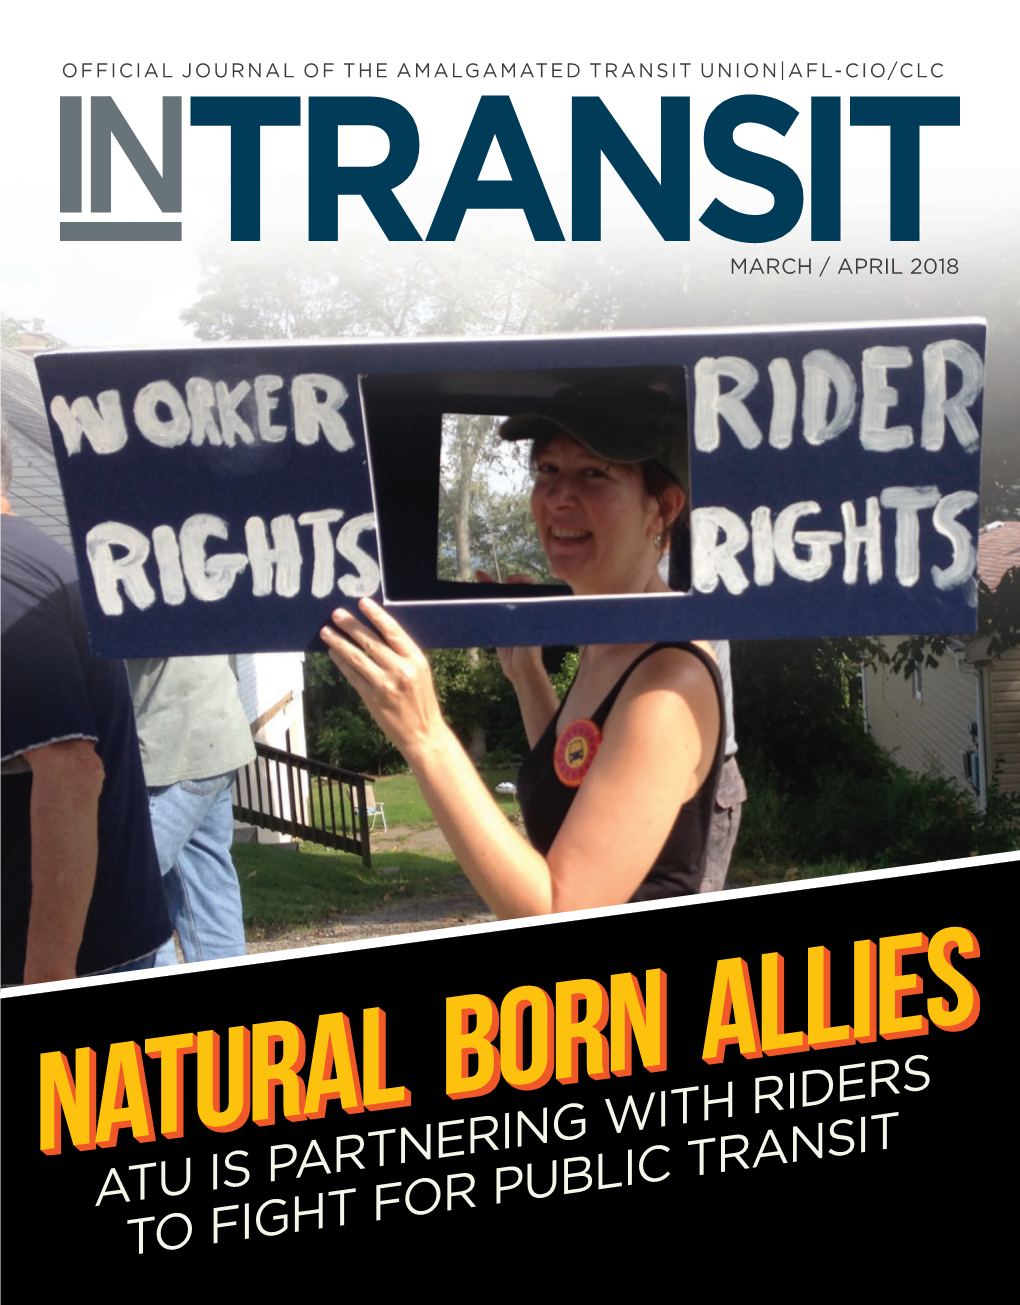 Atu Is Partnering with Riders to Fight for Public Transit International Officers Lawrence J